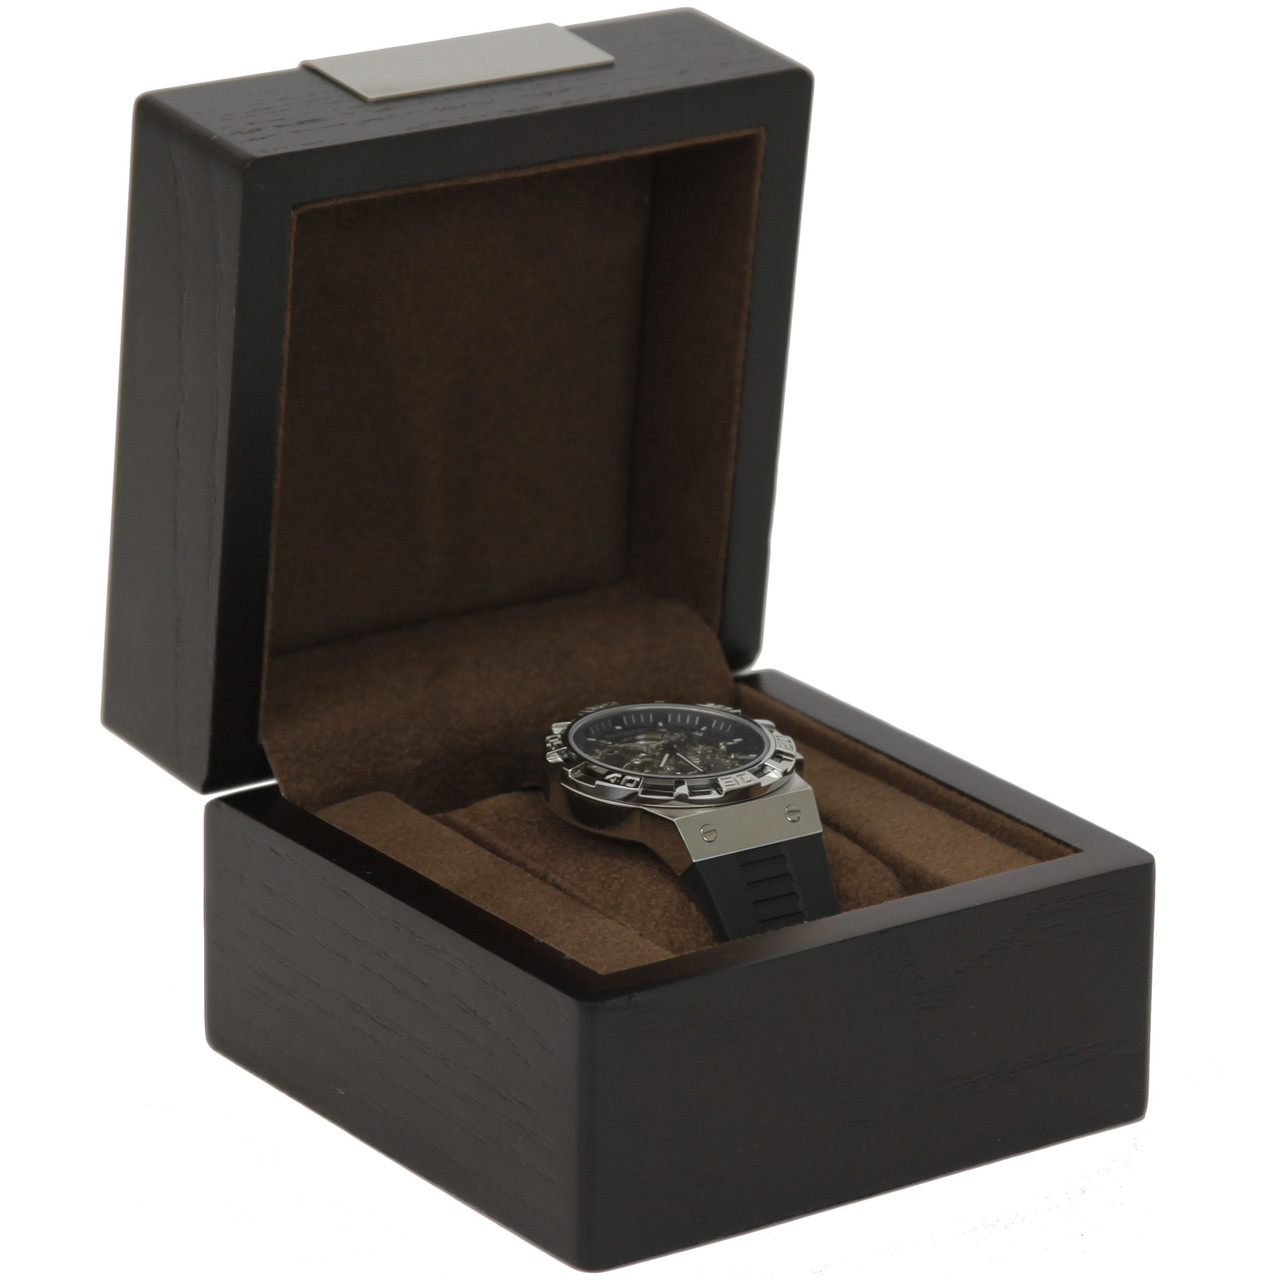 Single Watch Box 1 Extra Large Watch Wood Brown Finish Engravable Plate